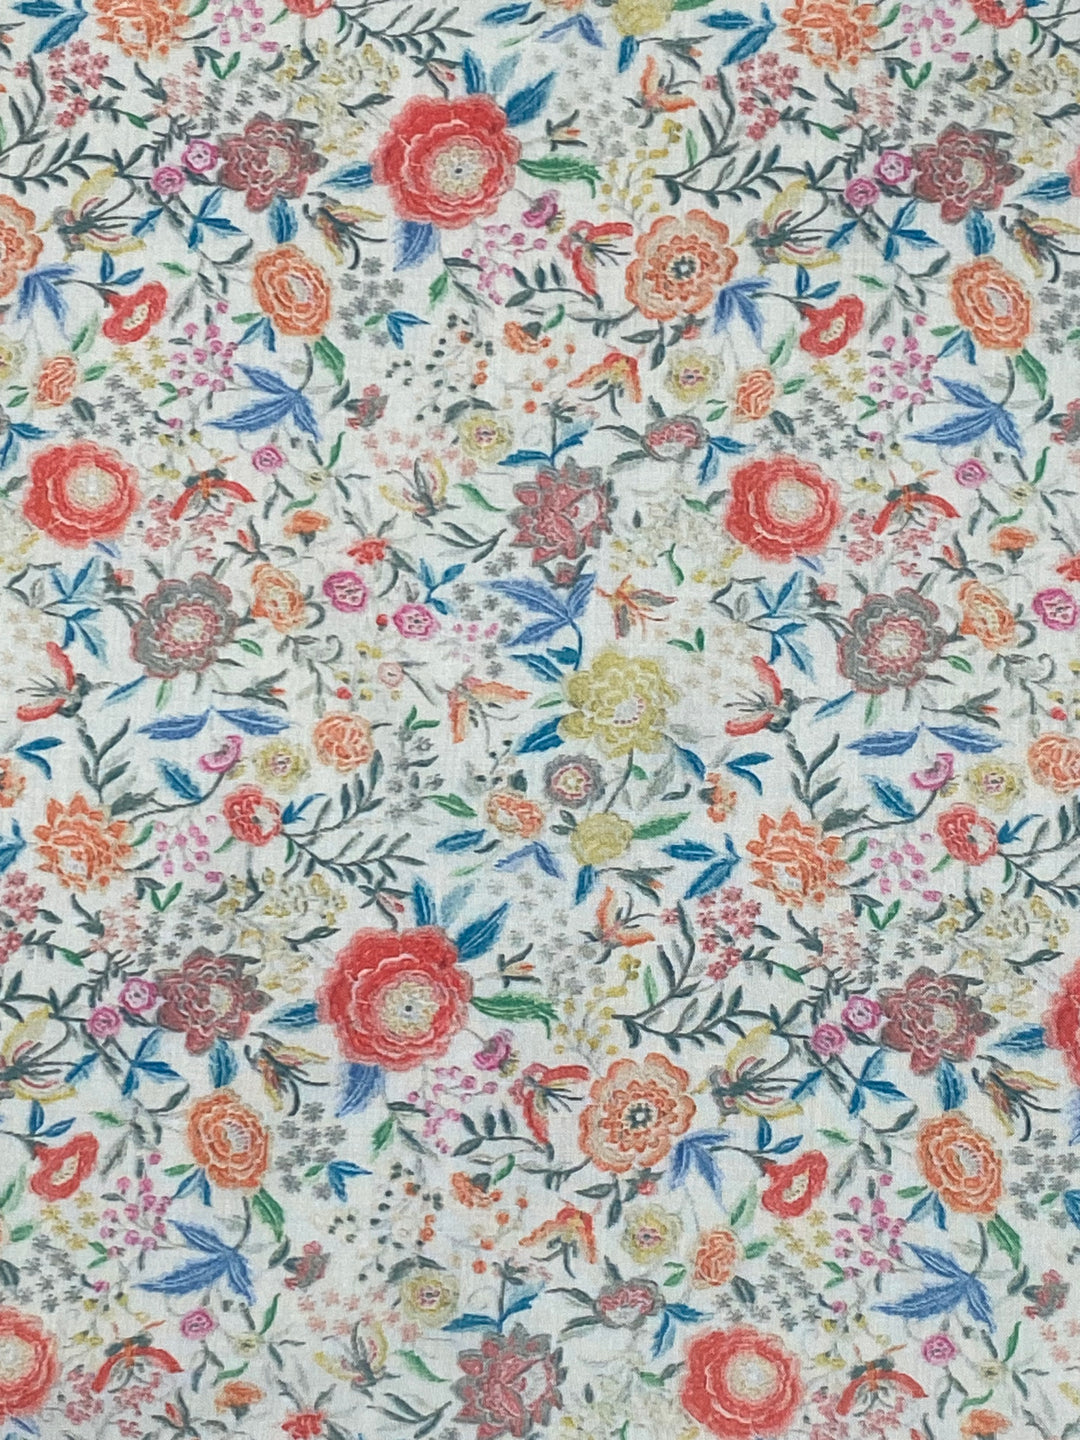 Printed Floral Cotton Fabric Off White